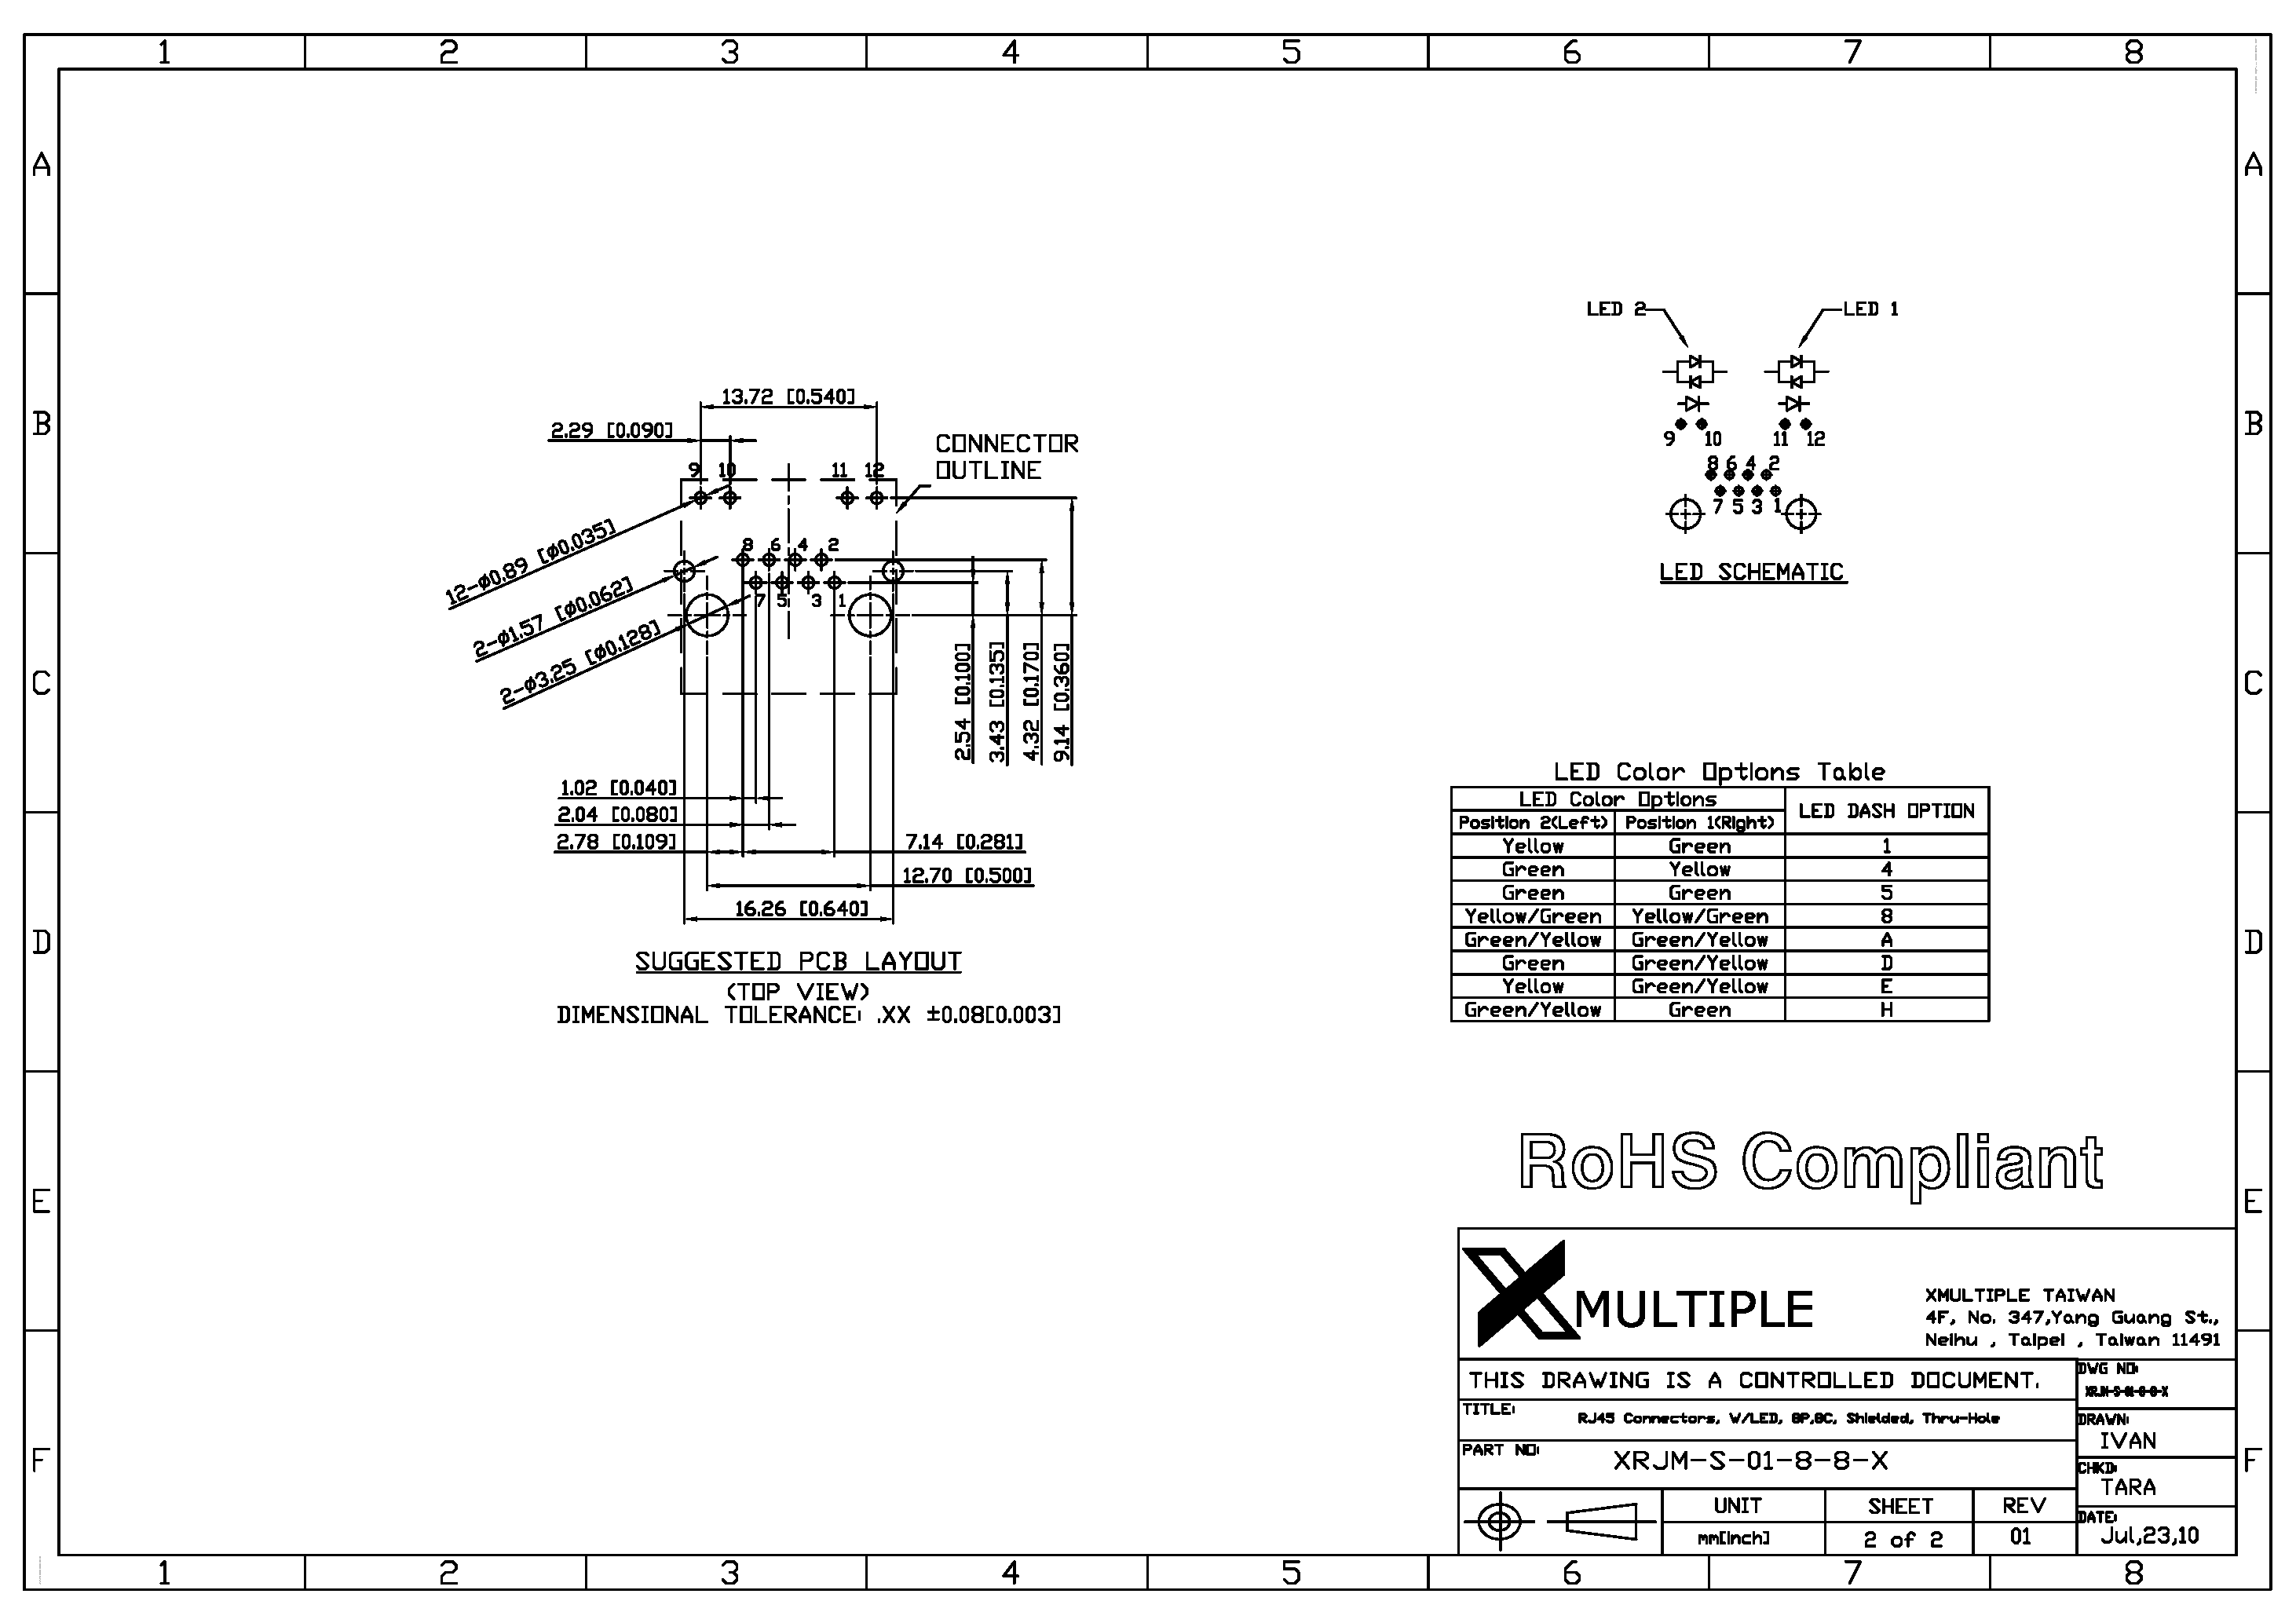 Datasheet XRJM-S-01-8-8-x - Connector page 2